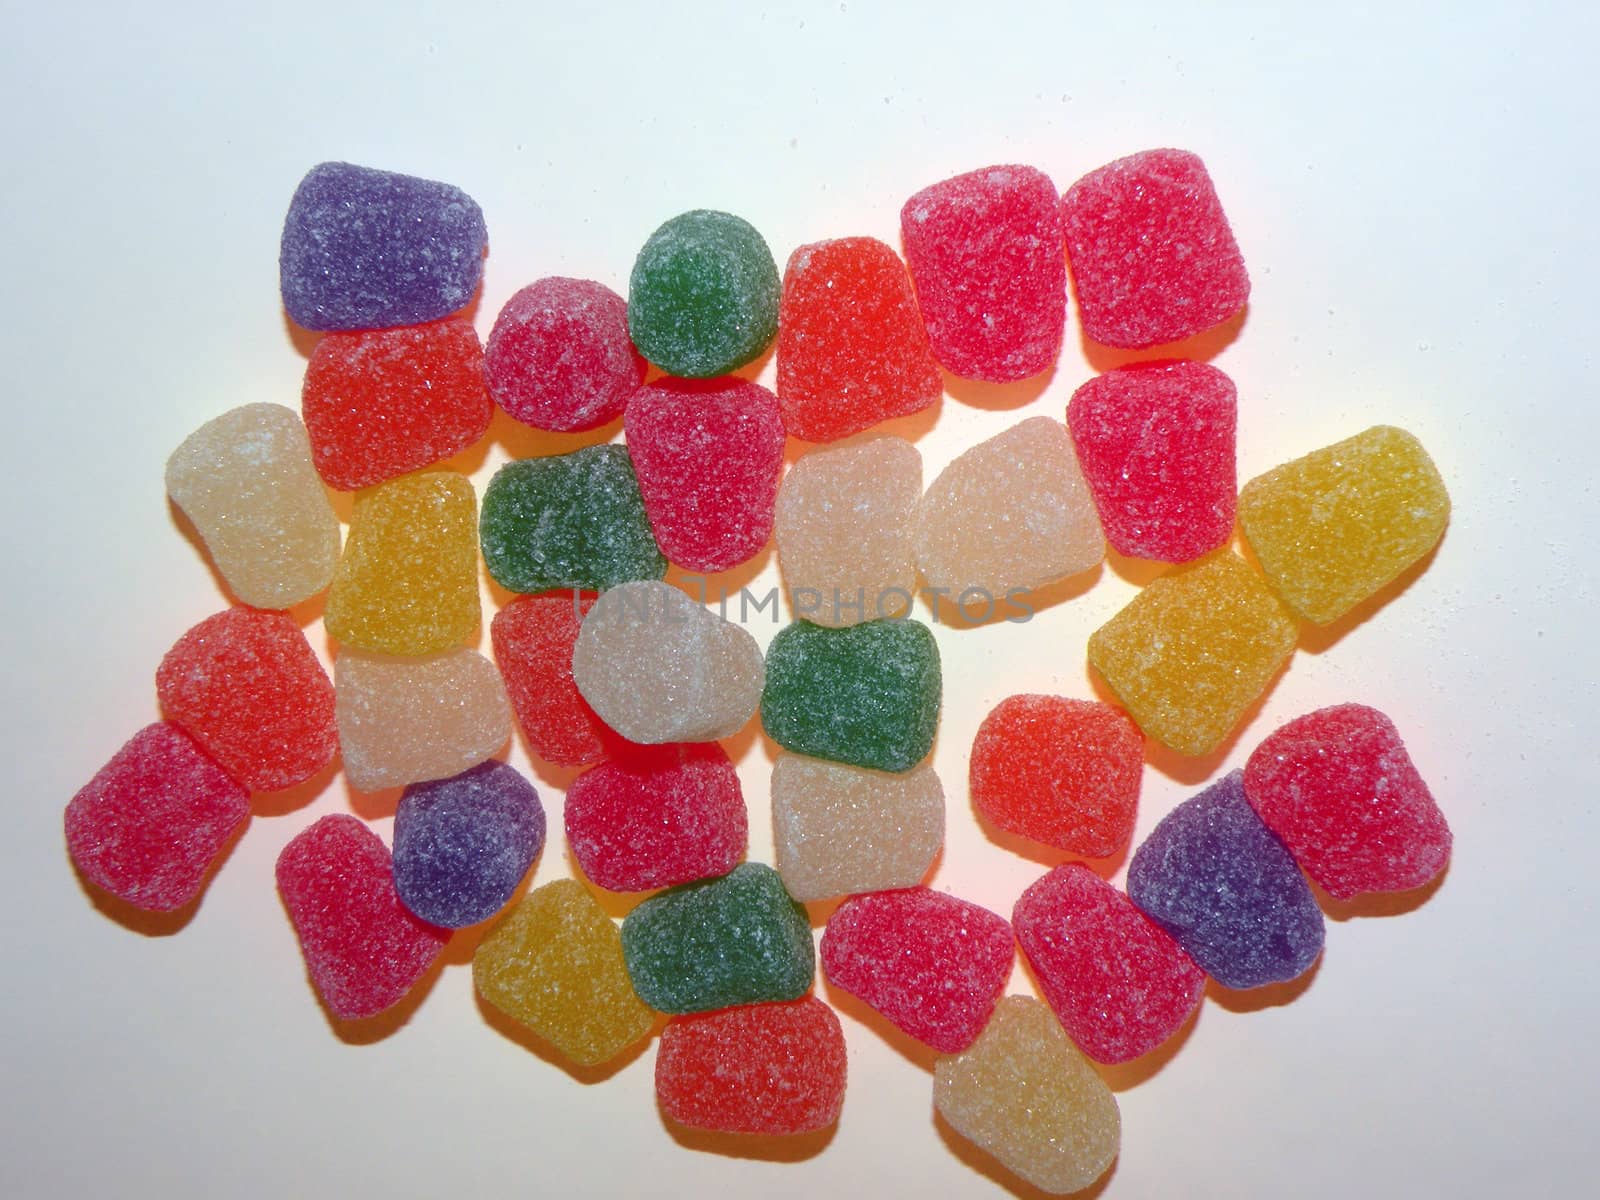 a selection of different colored gumdrops